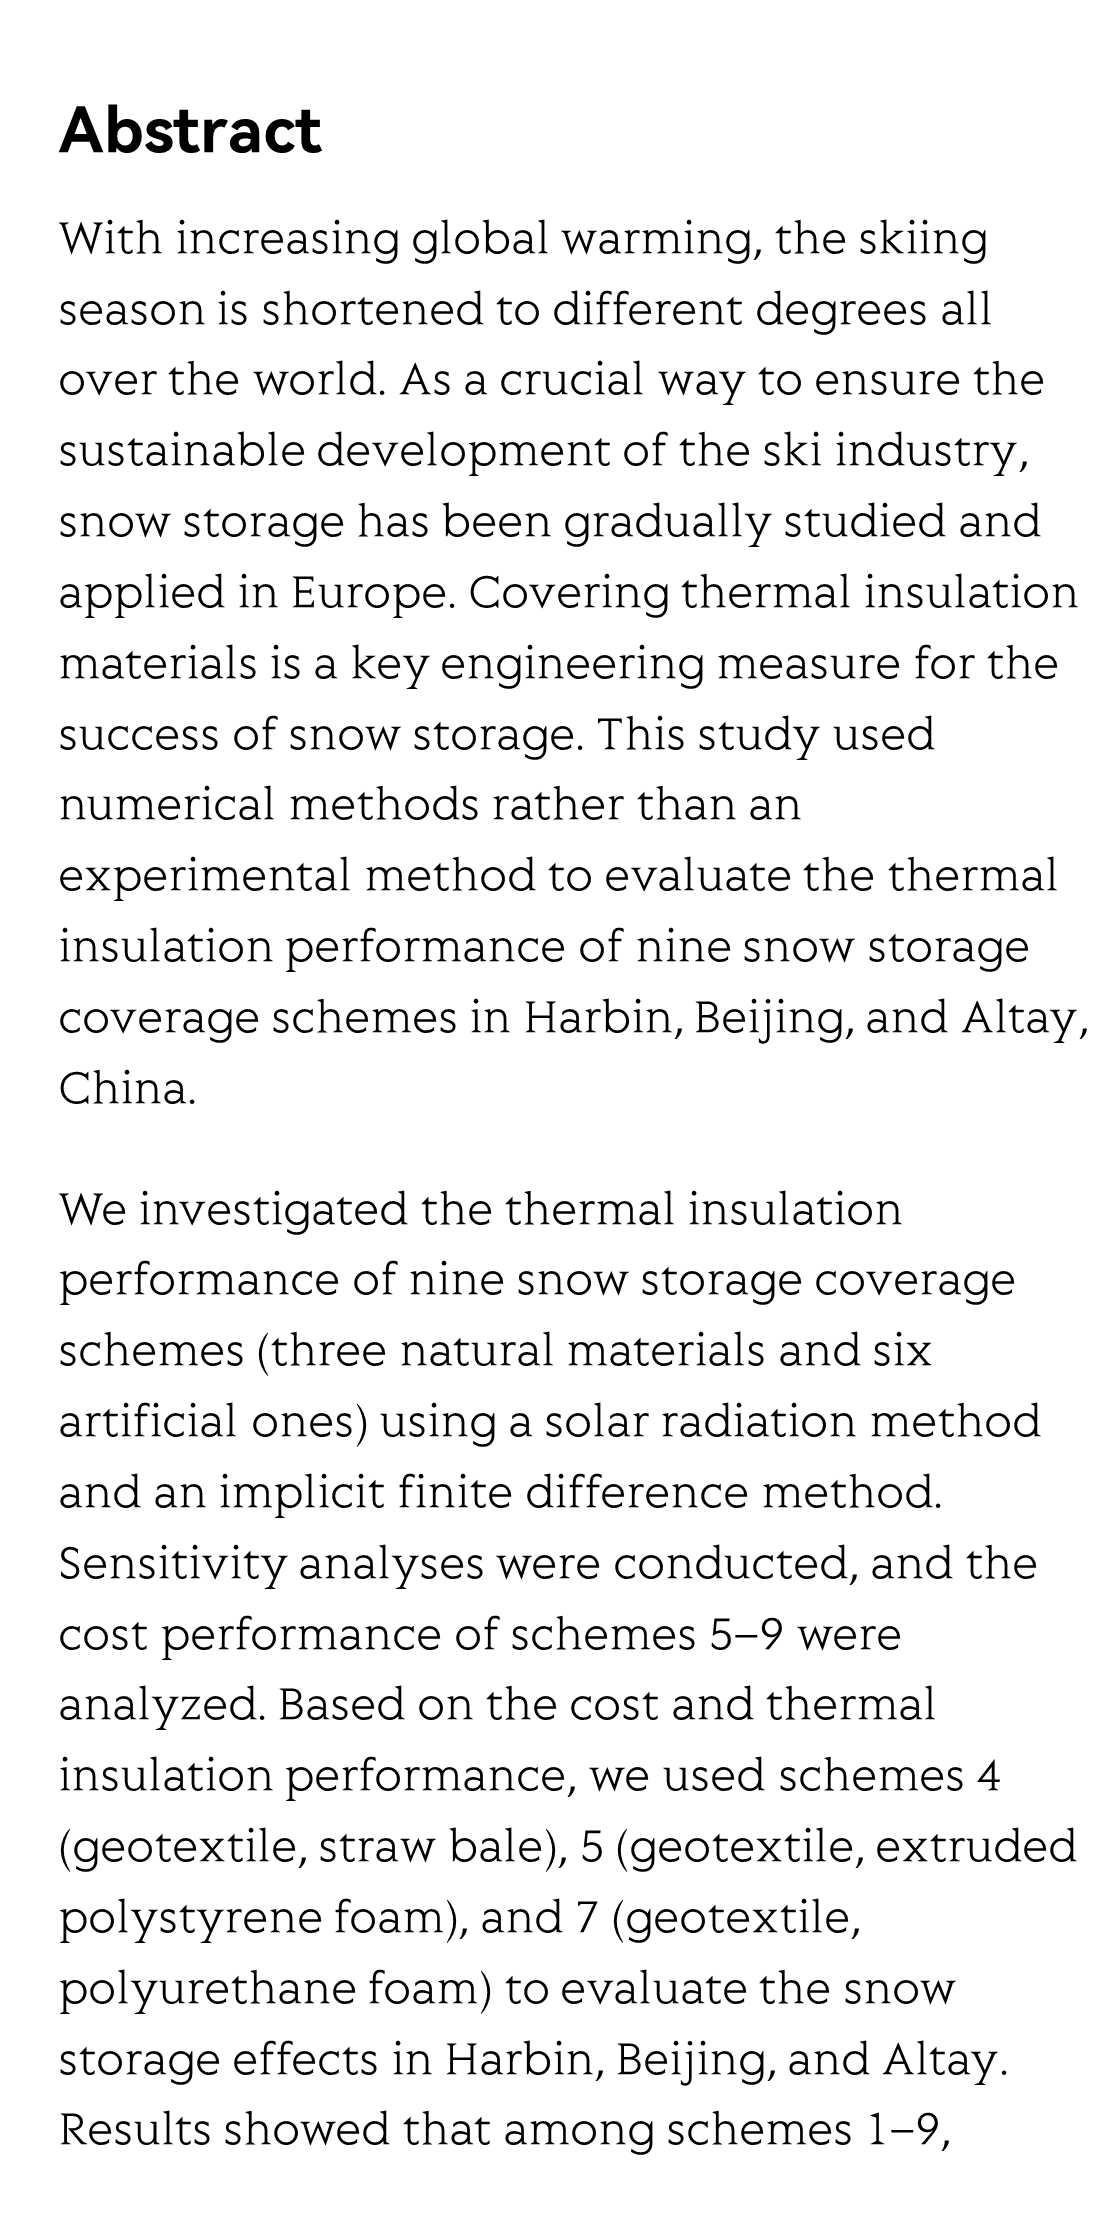 Numerical estimation of thermal insulation performance of different coverage schemes at three places for snow storage_2